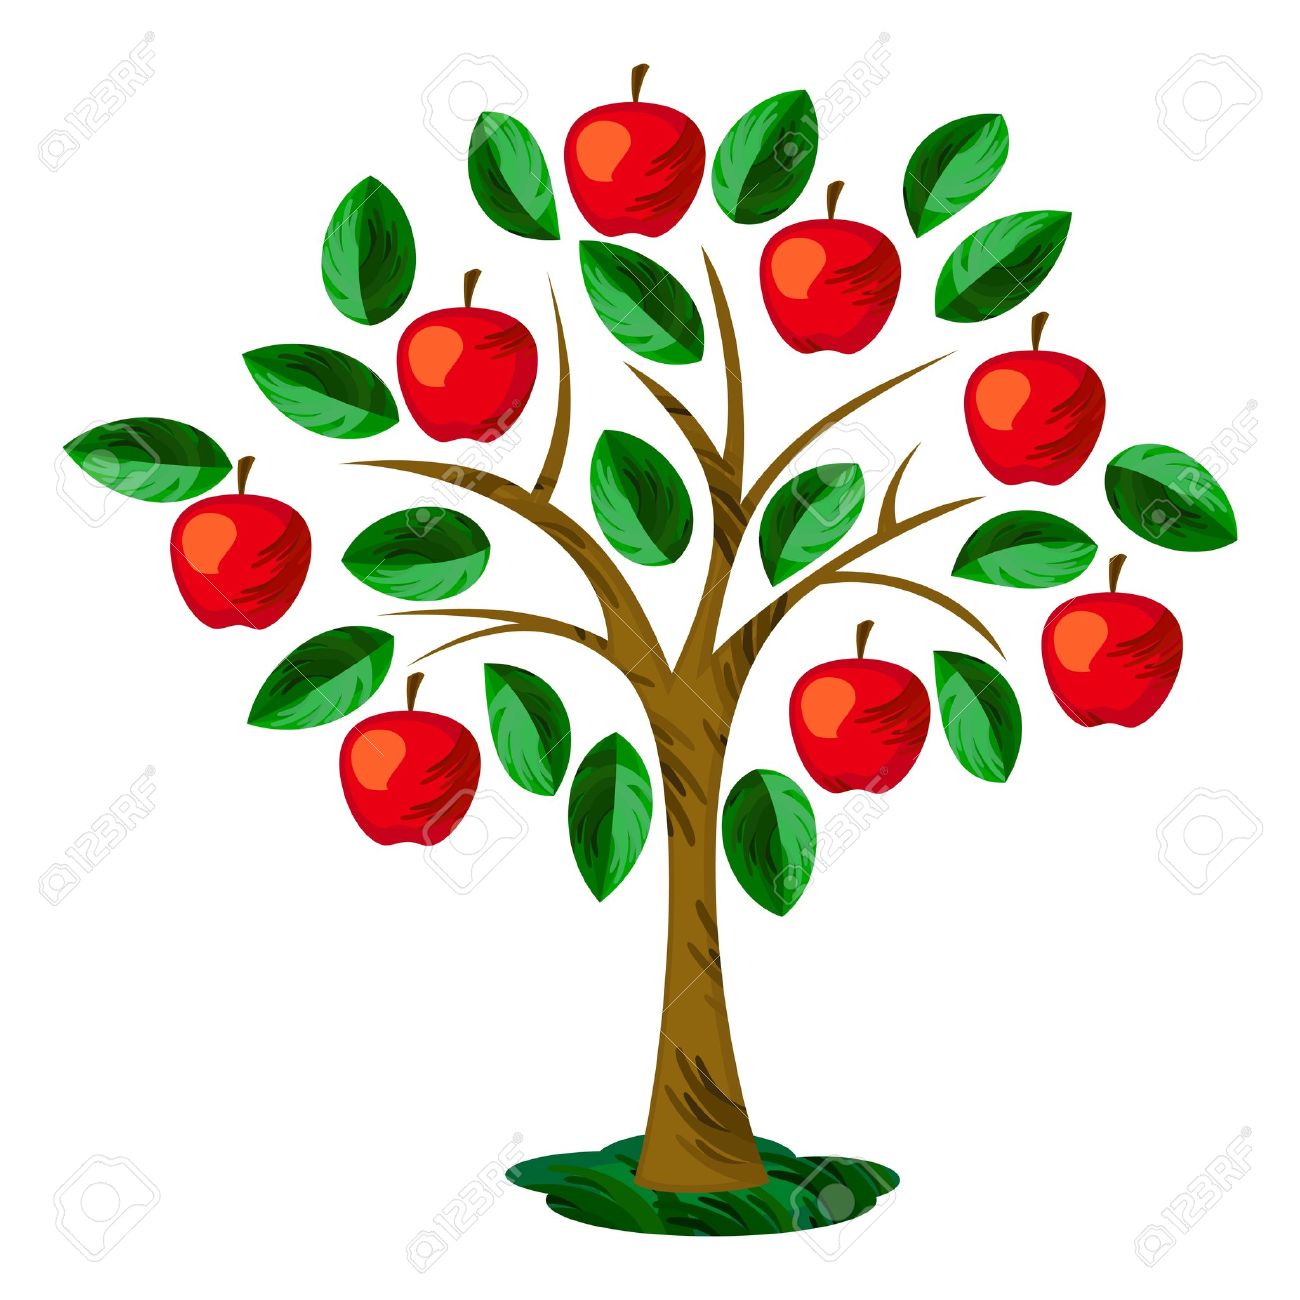 Fruit tree icon Stock image and royalty-free vector files on 